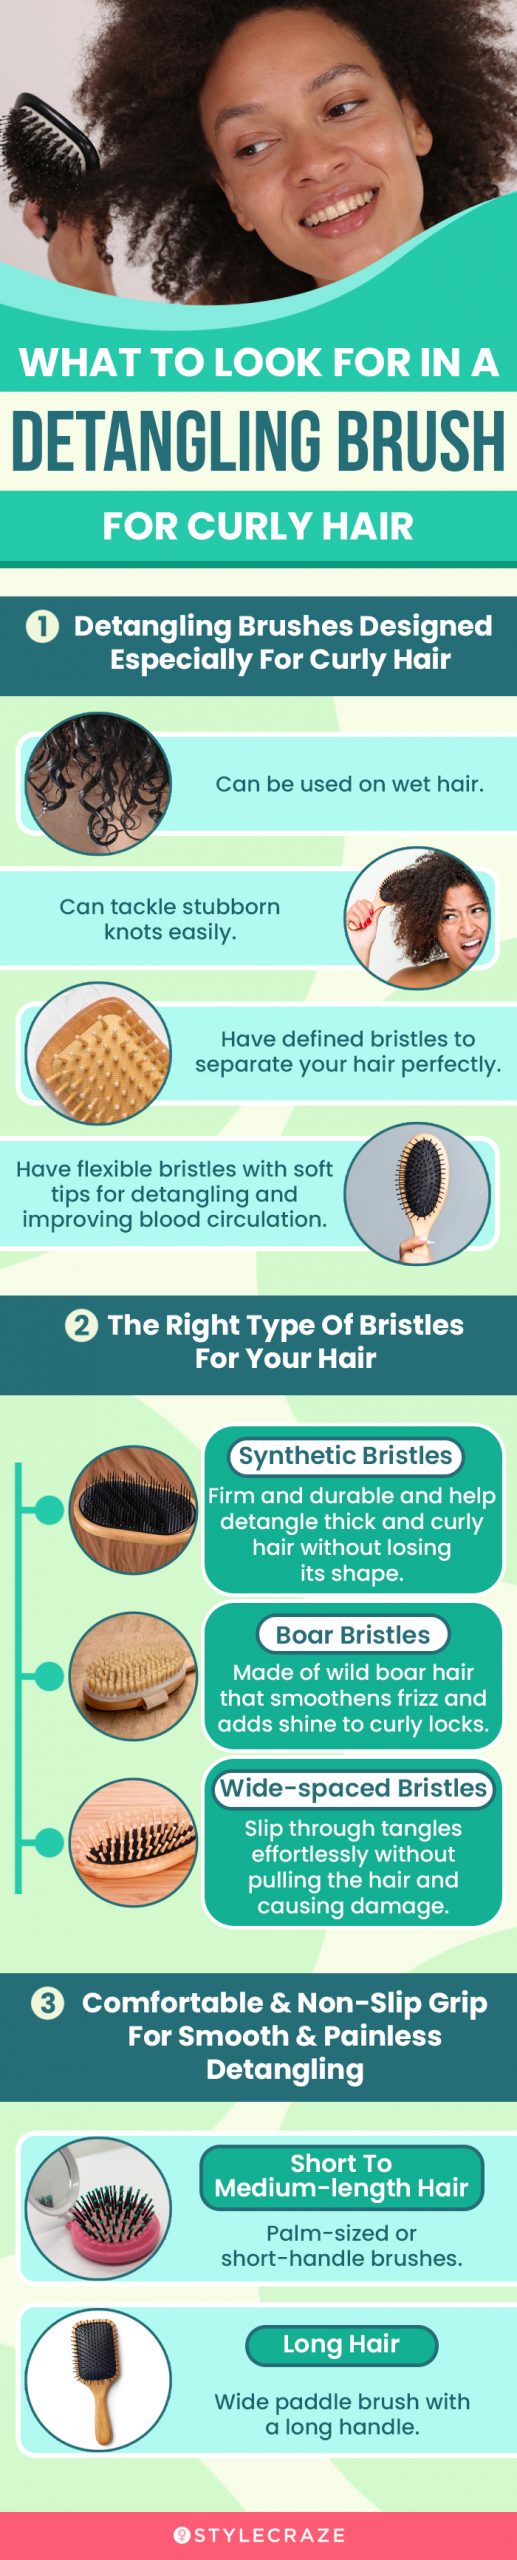 What To Look For In A Detangling Brush For Curly Hair  [infographic]